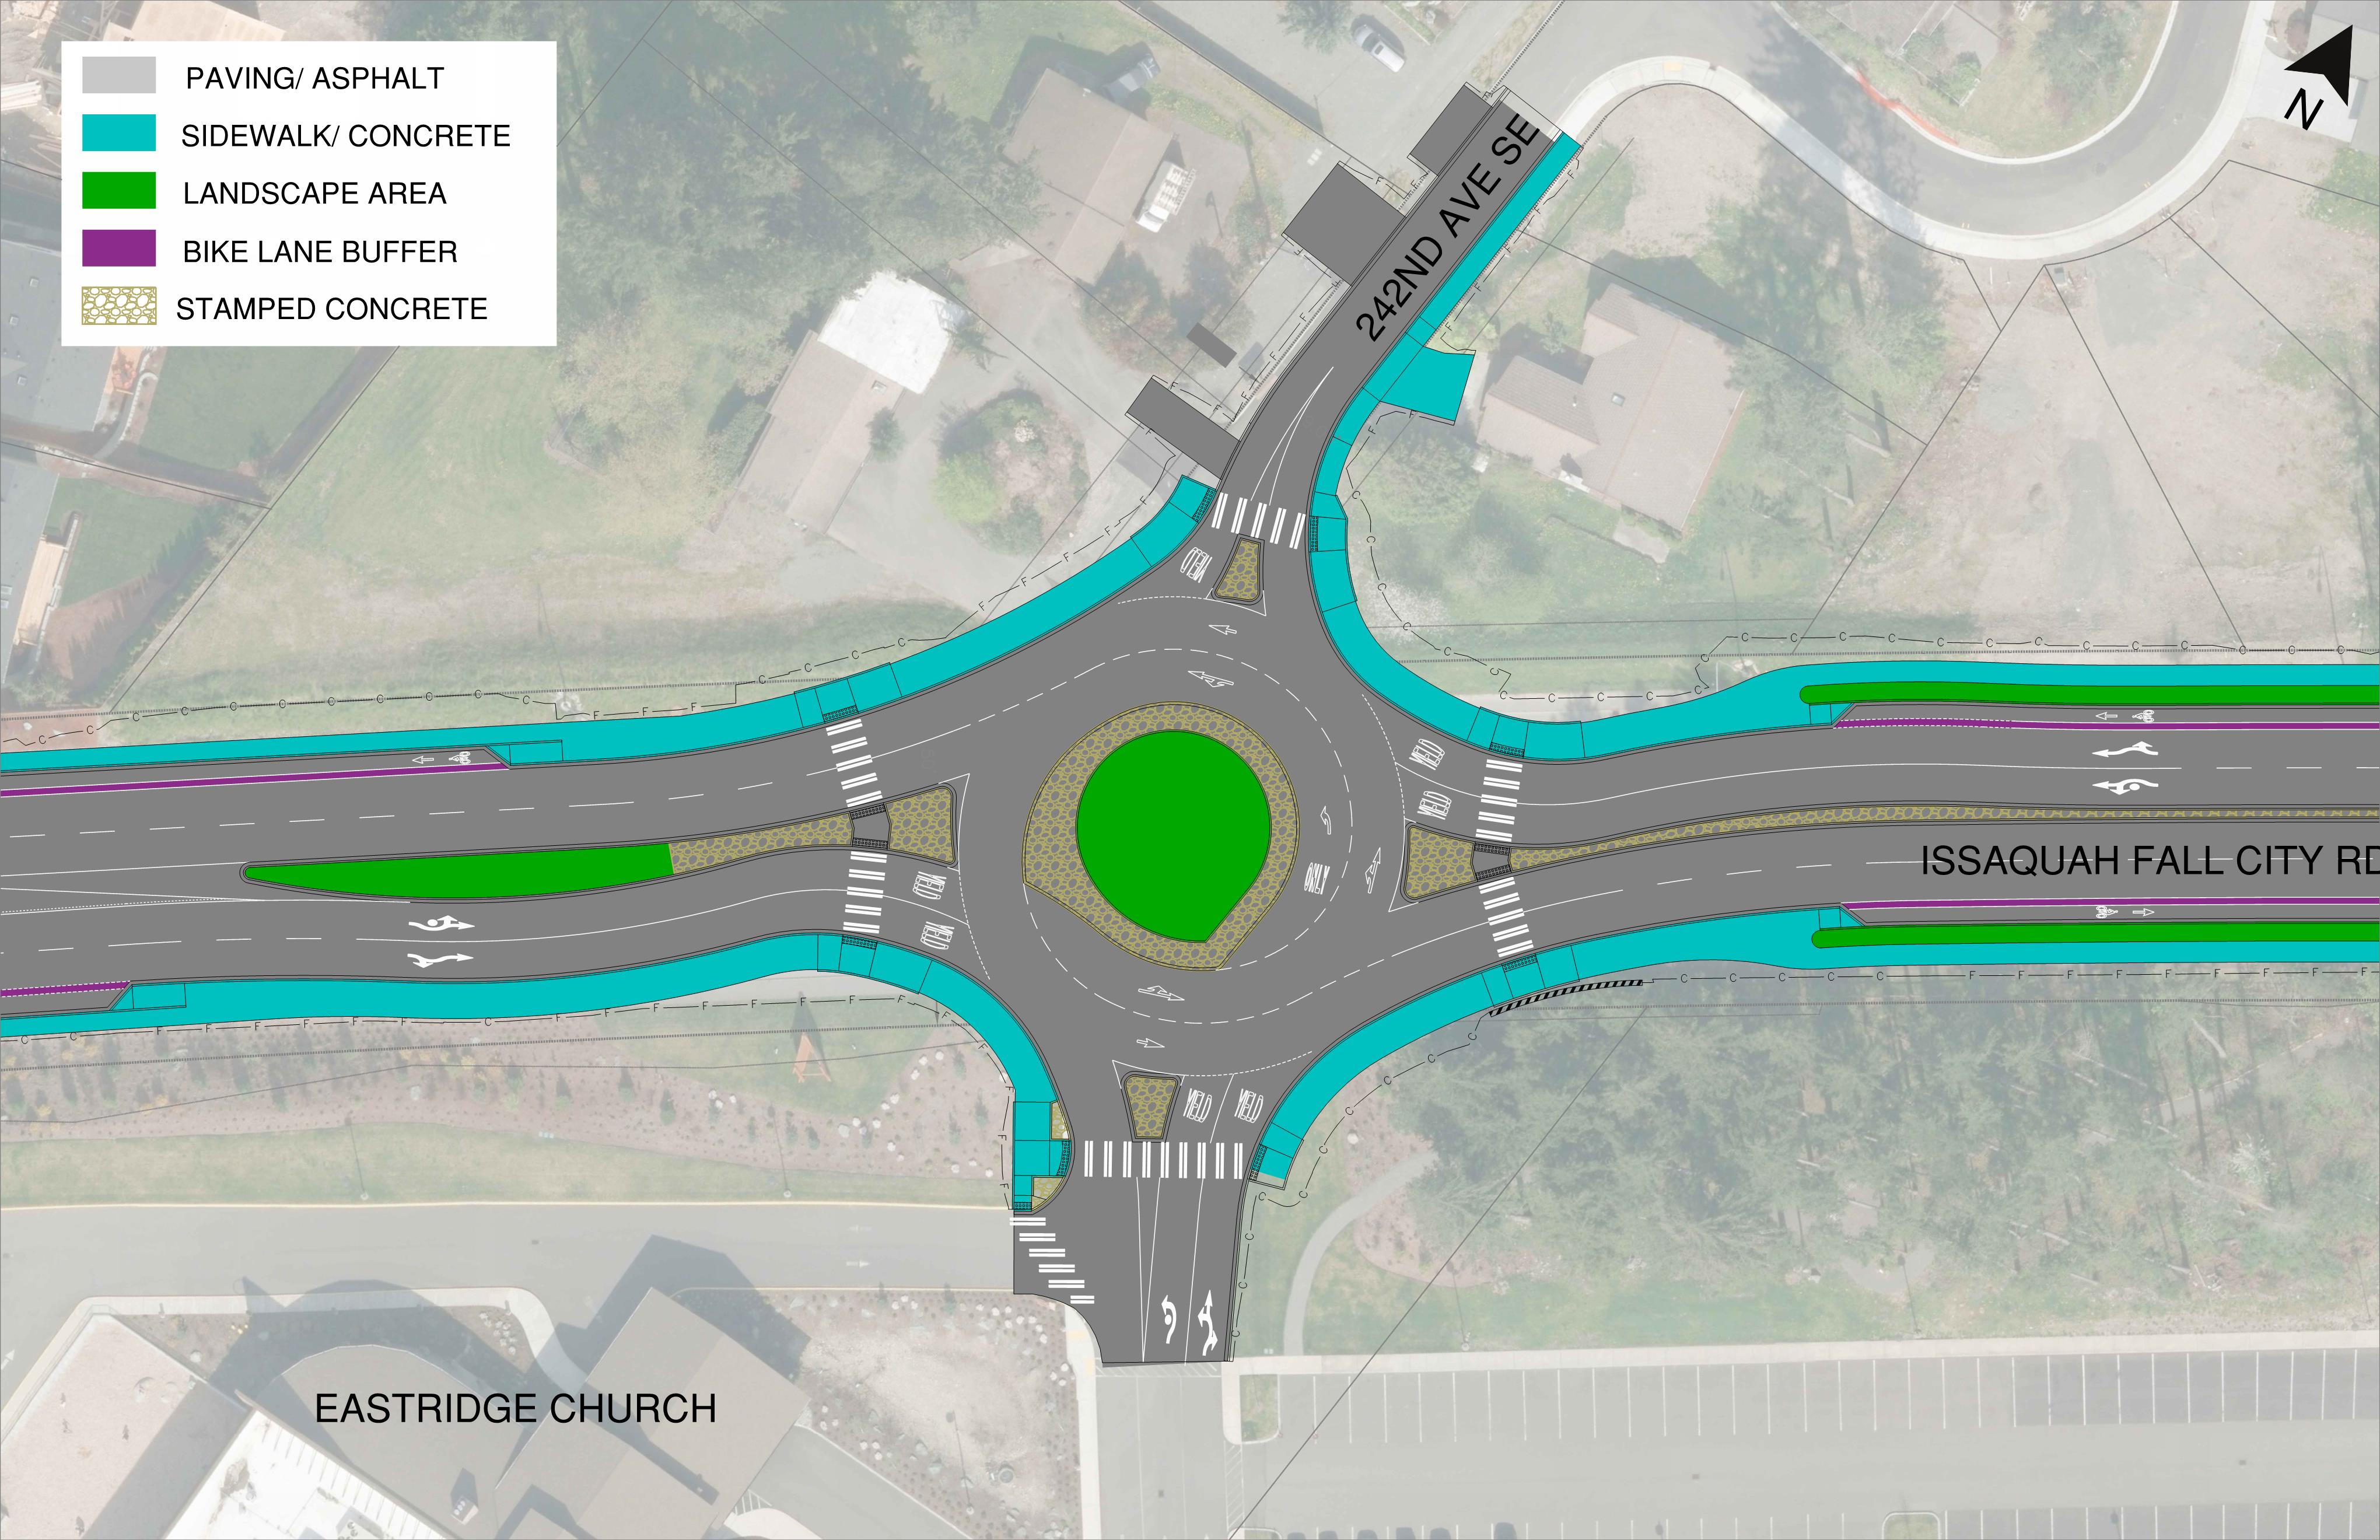 plan for Issaquah Fall City Road roundabout at 242nd adjacent to Eastridge Church